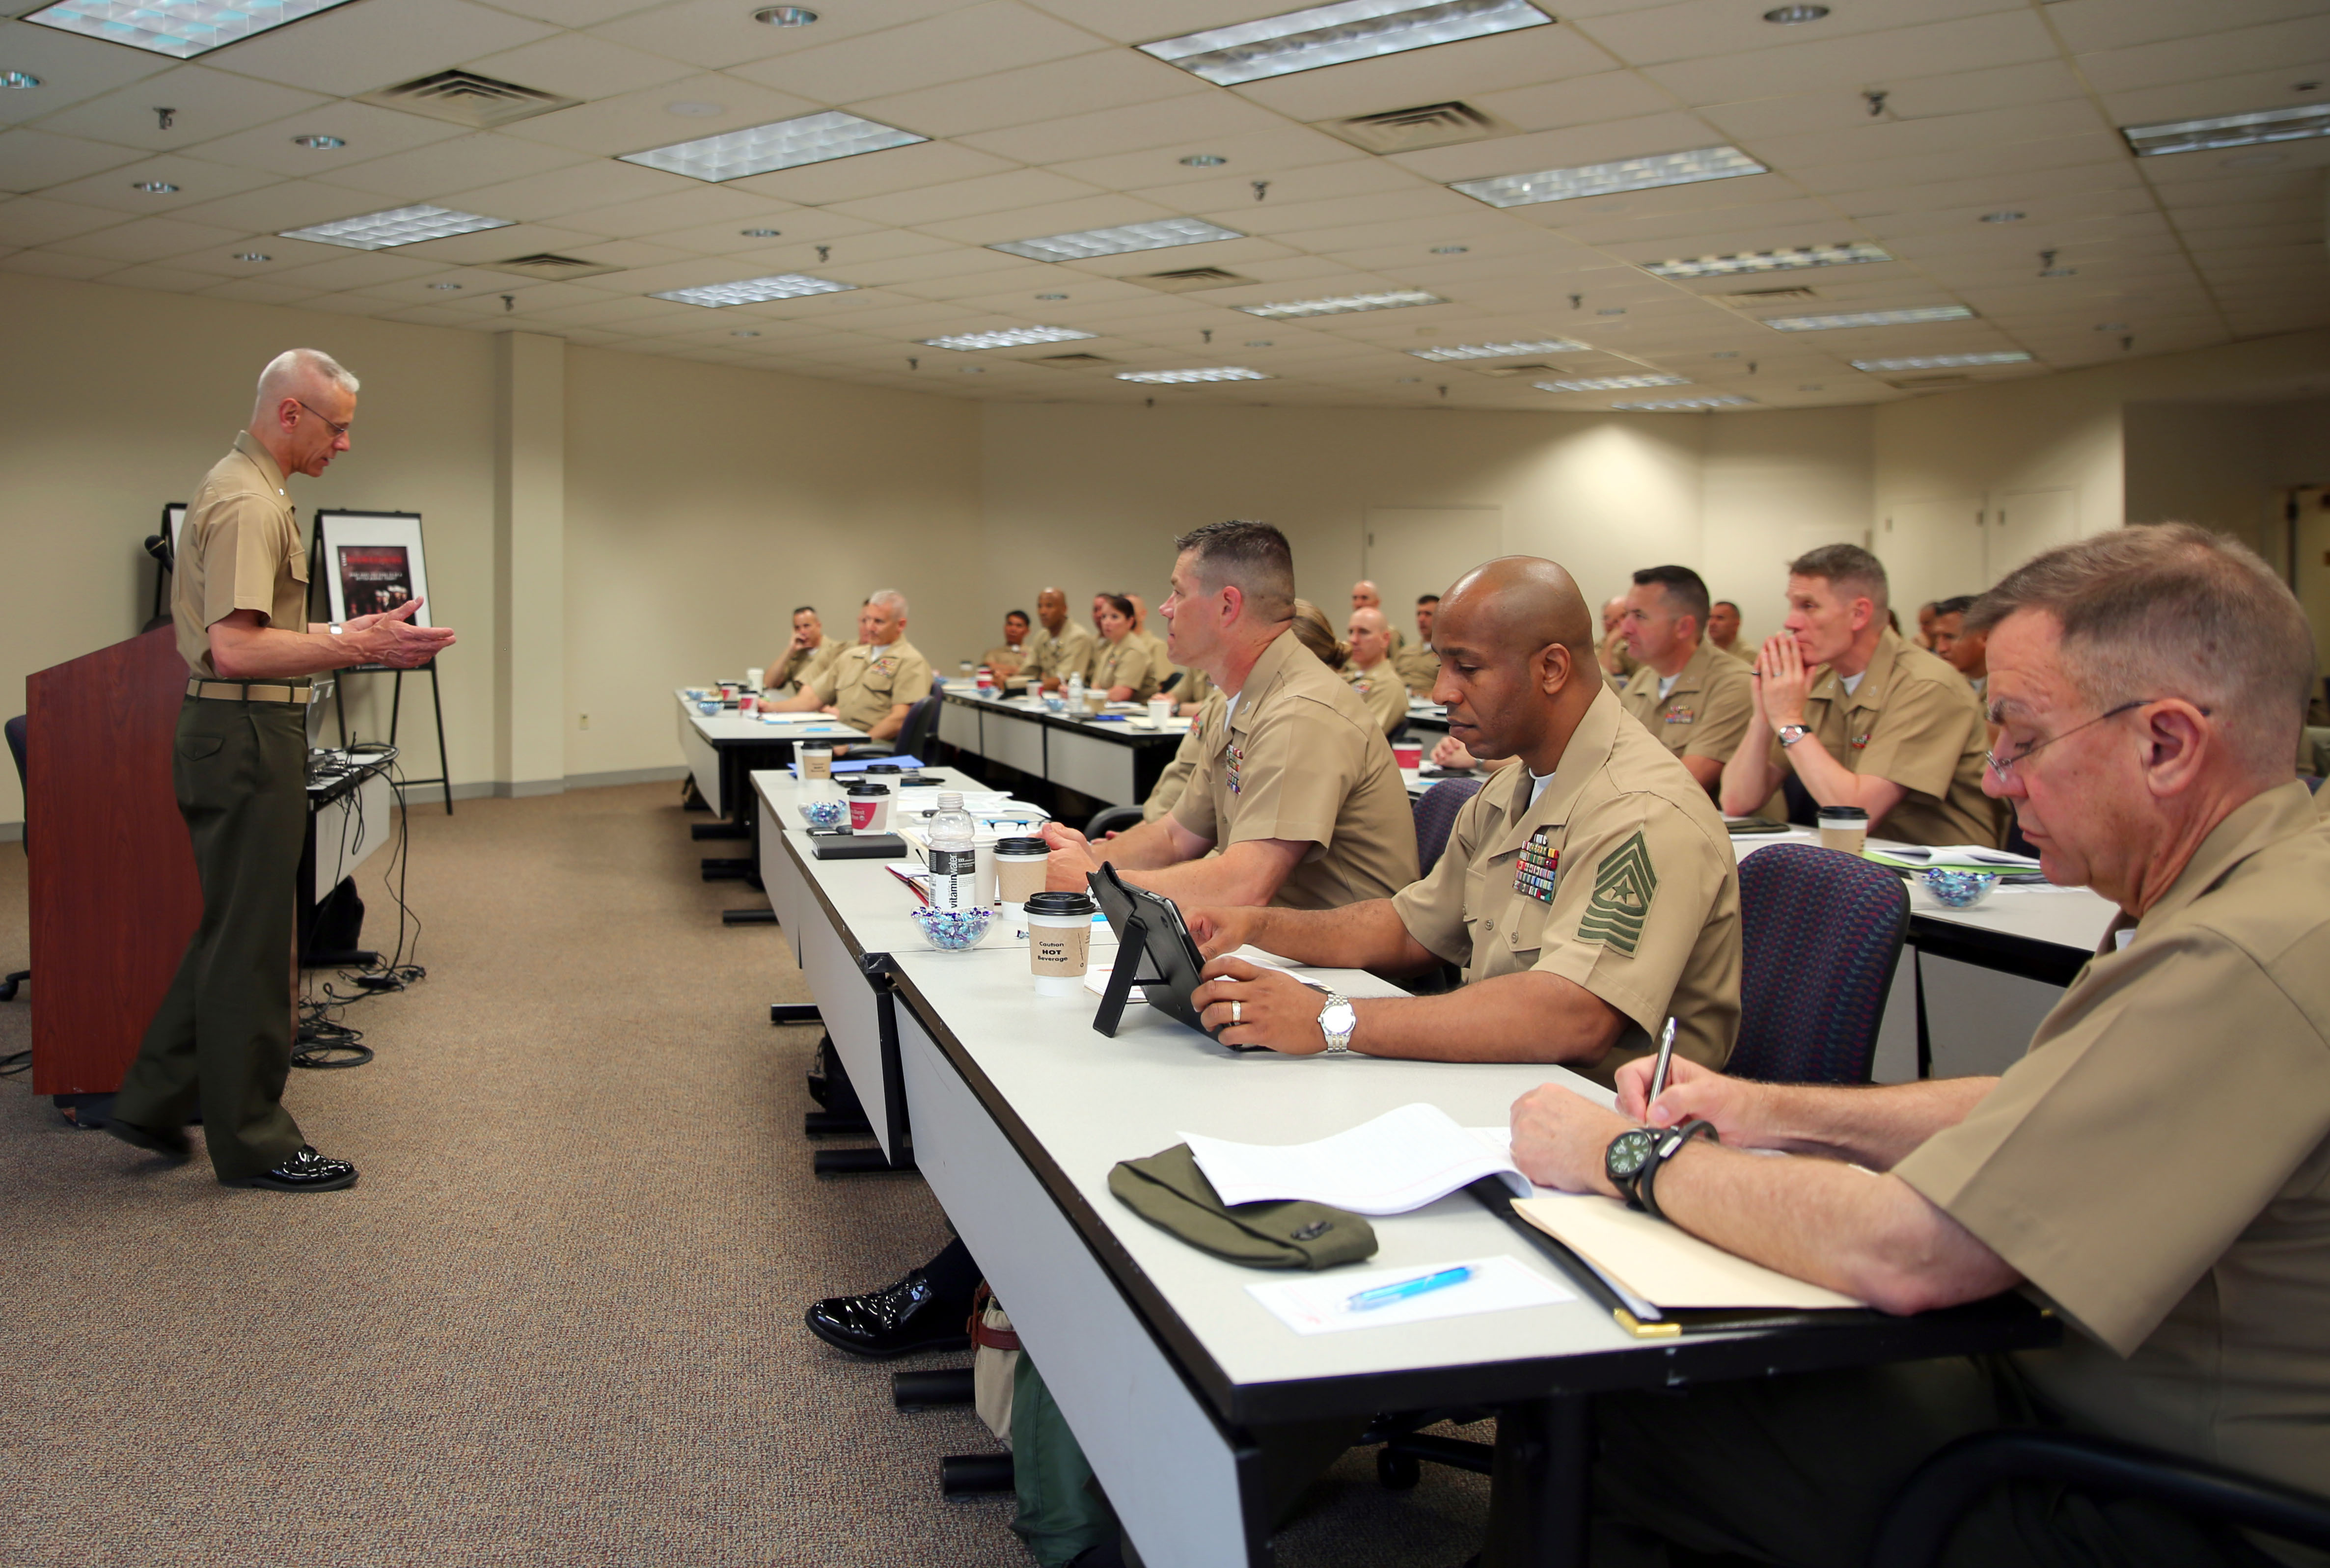 3rd Marine Logistics Group meets the challenge